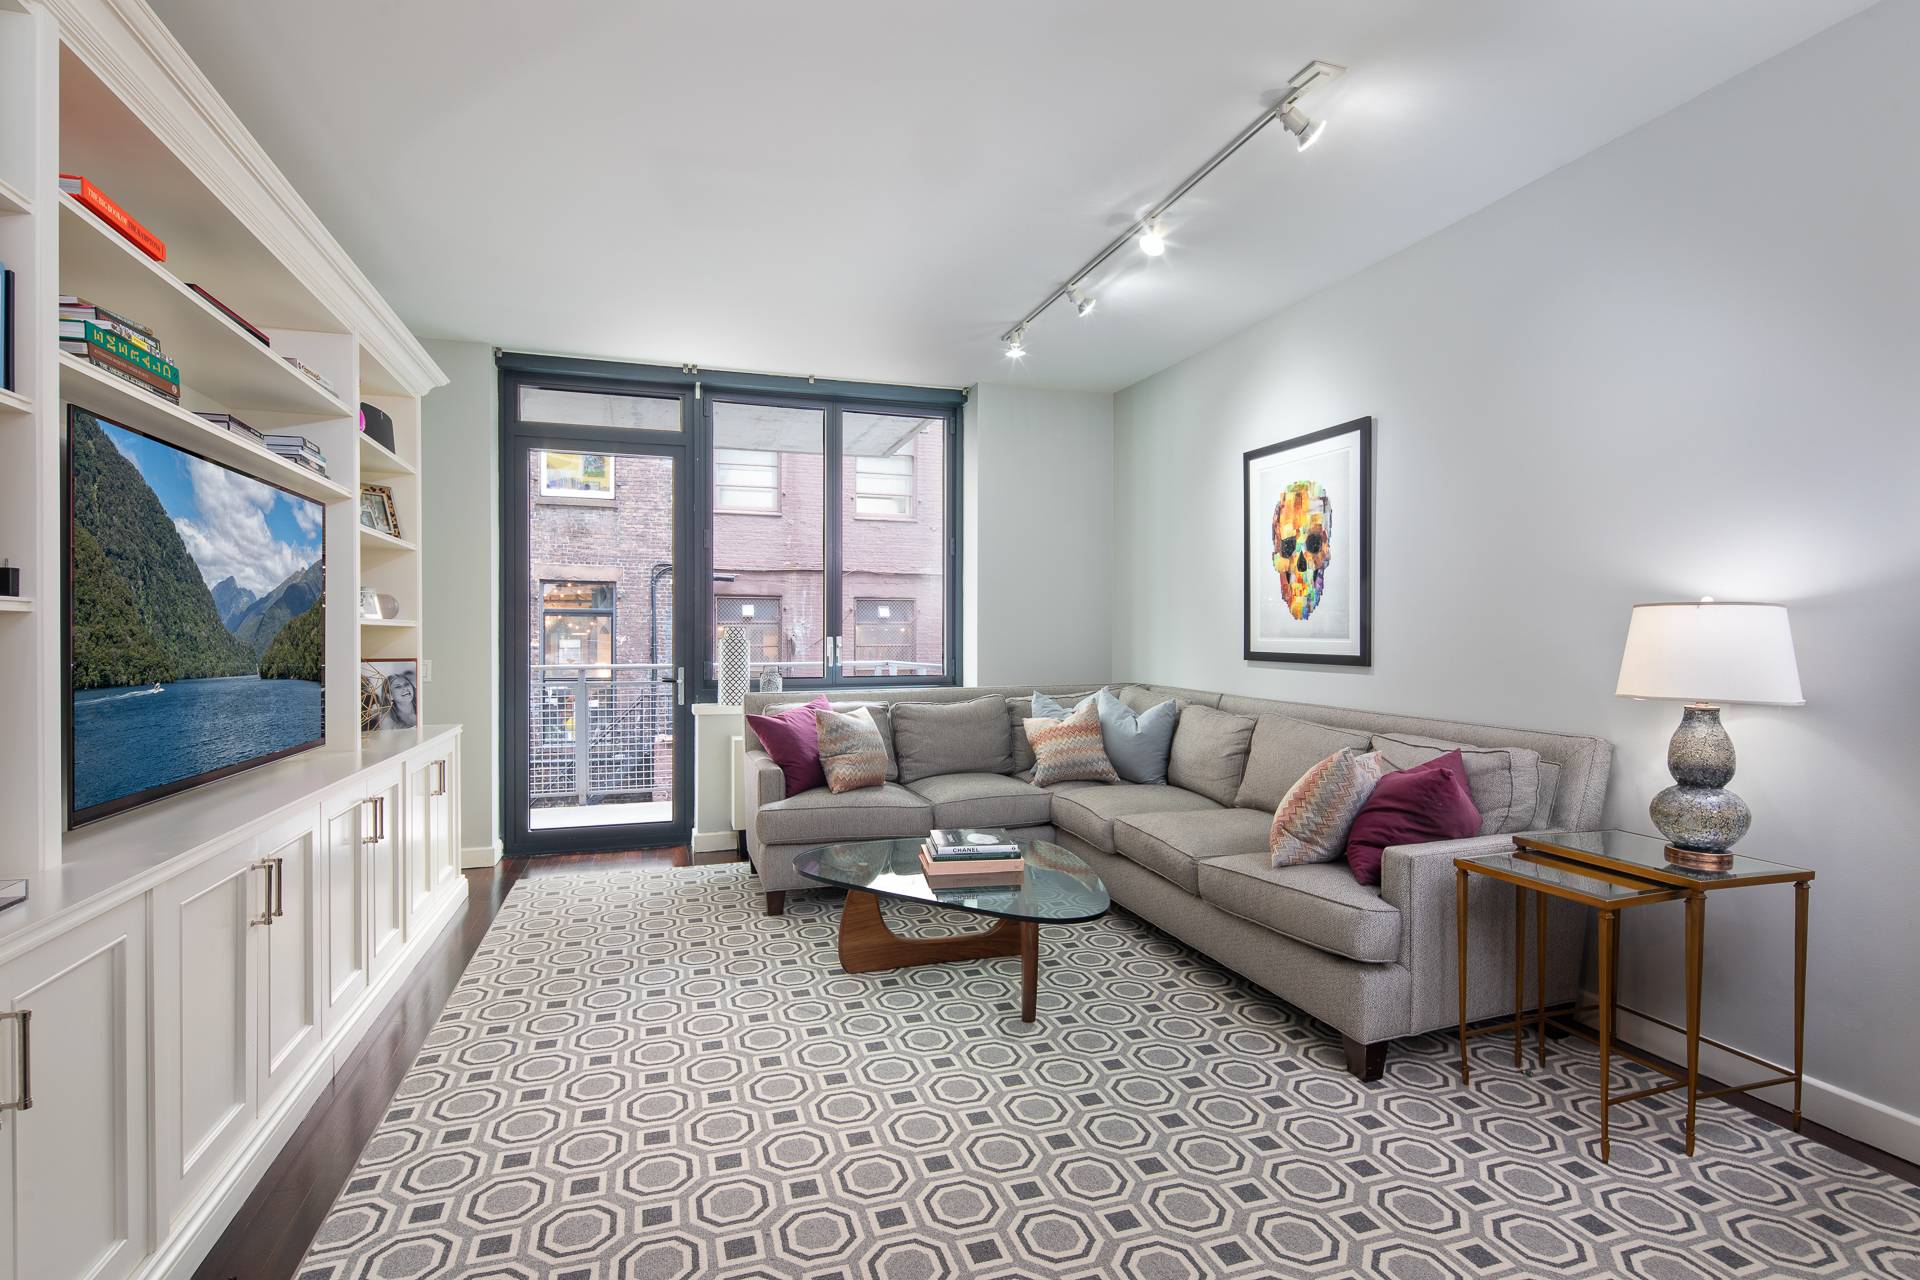 Welcome to your new home, a serene retreat on a quiet block in a fantastic location the crossroads of Union Square, the West Village, Chelsea and Flatiron.